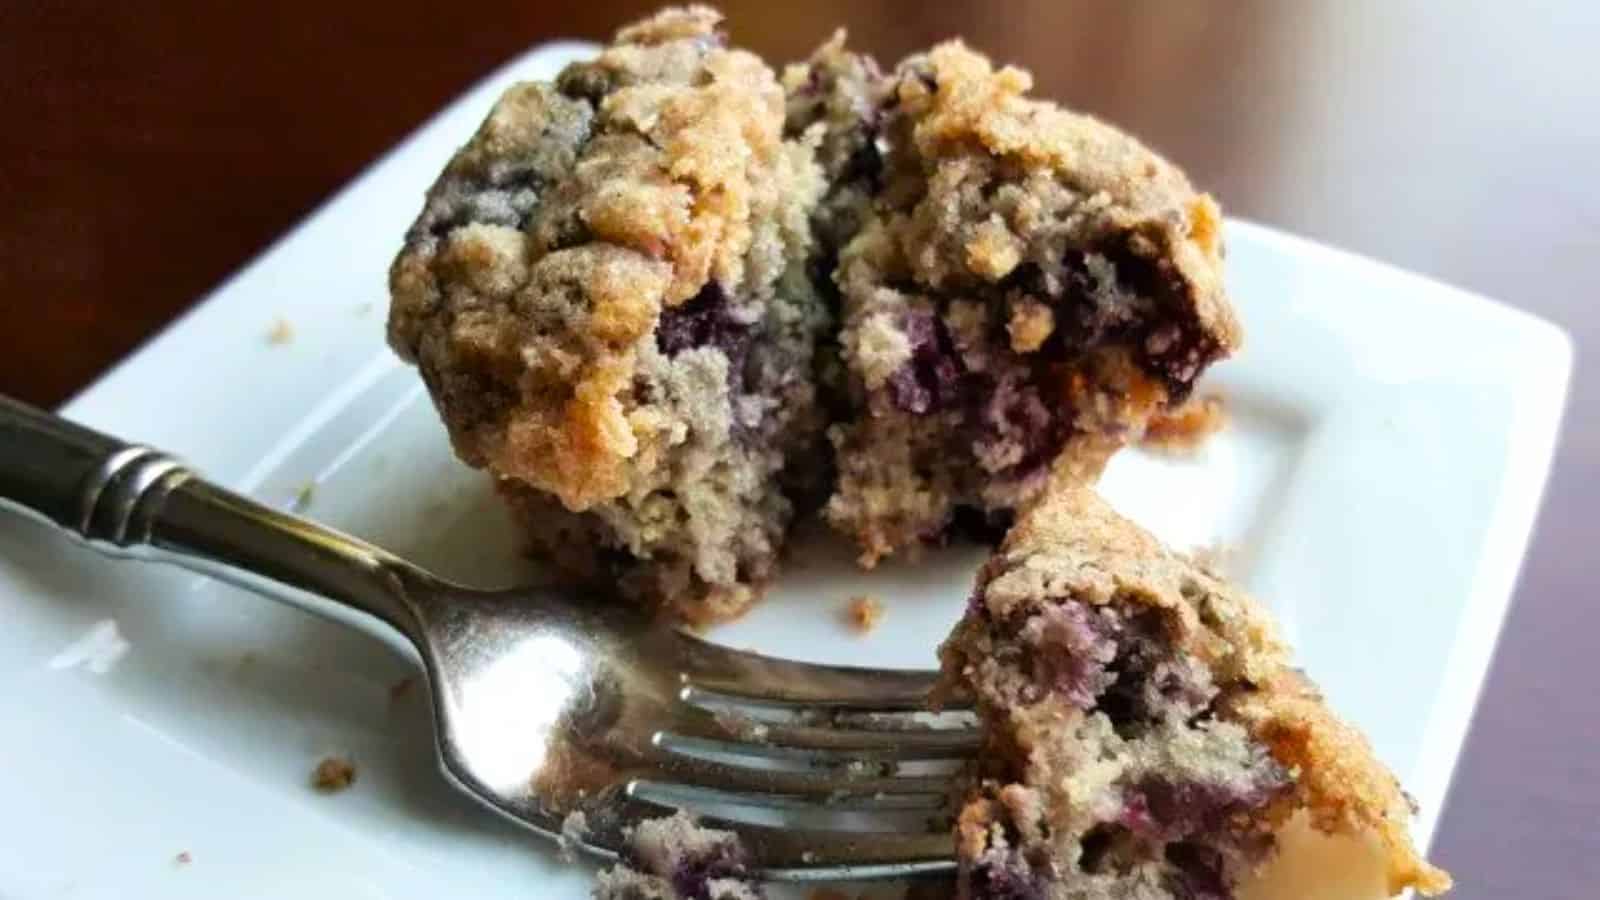 Image shows an Individual Blueberry Coffeecake on a plate with a fork holding a bite.